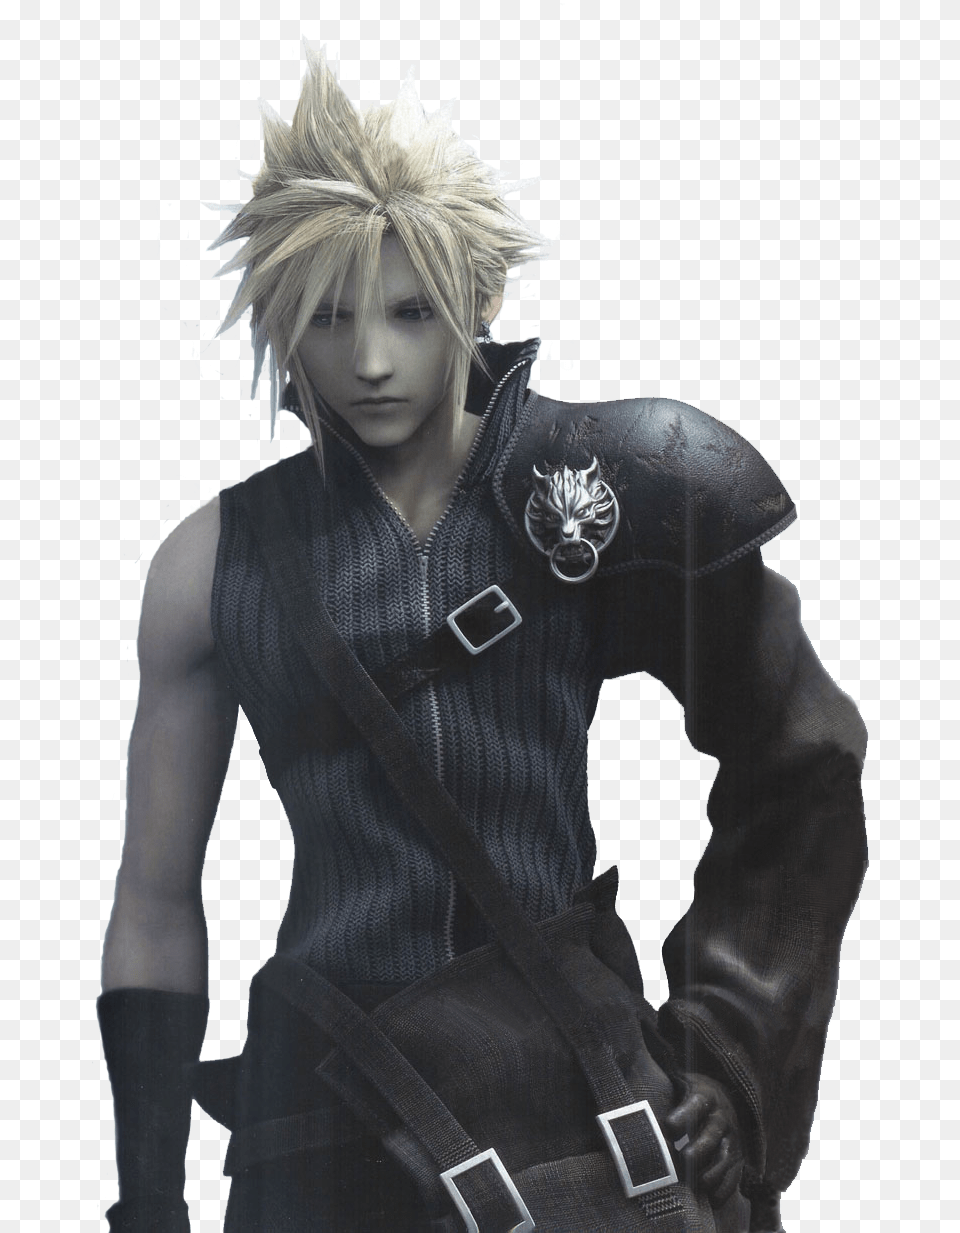 Anime Cloud Strife Final Fantasy Advent Children Cloud, Person, Clothing, Costume, Adult Png